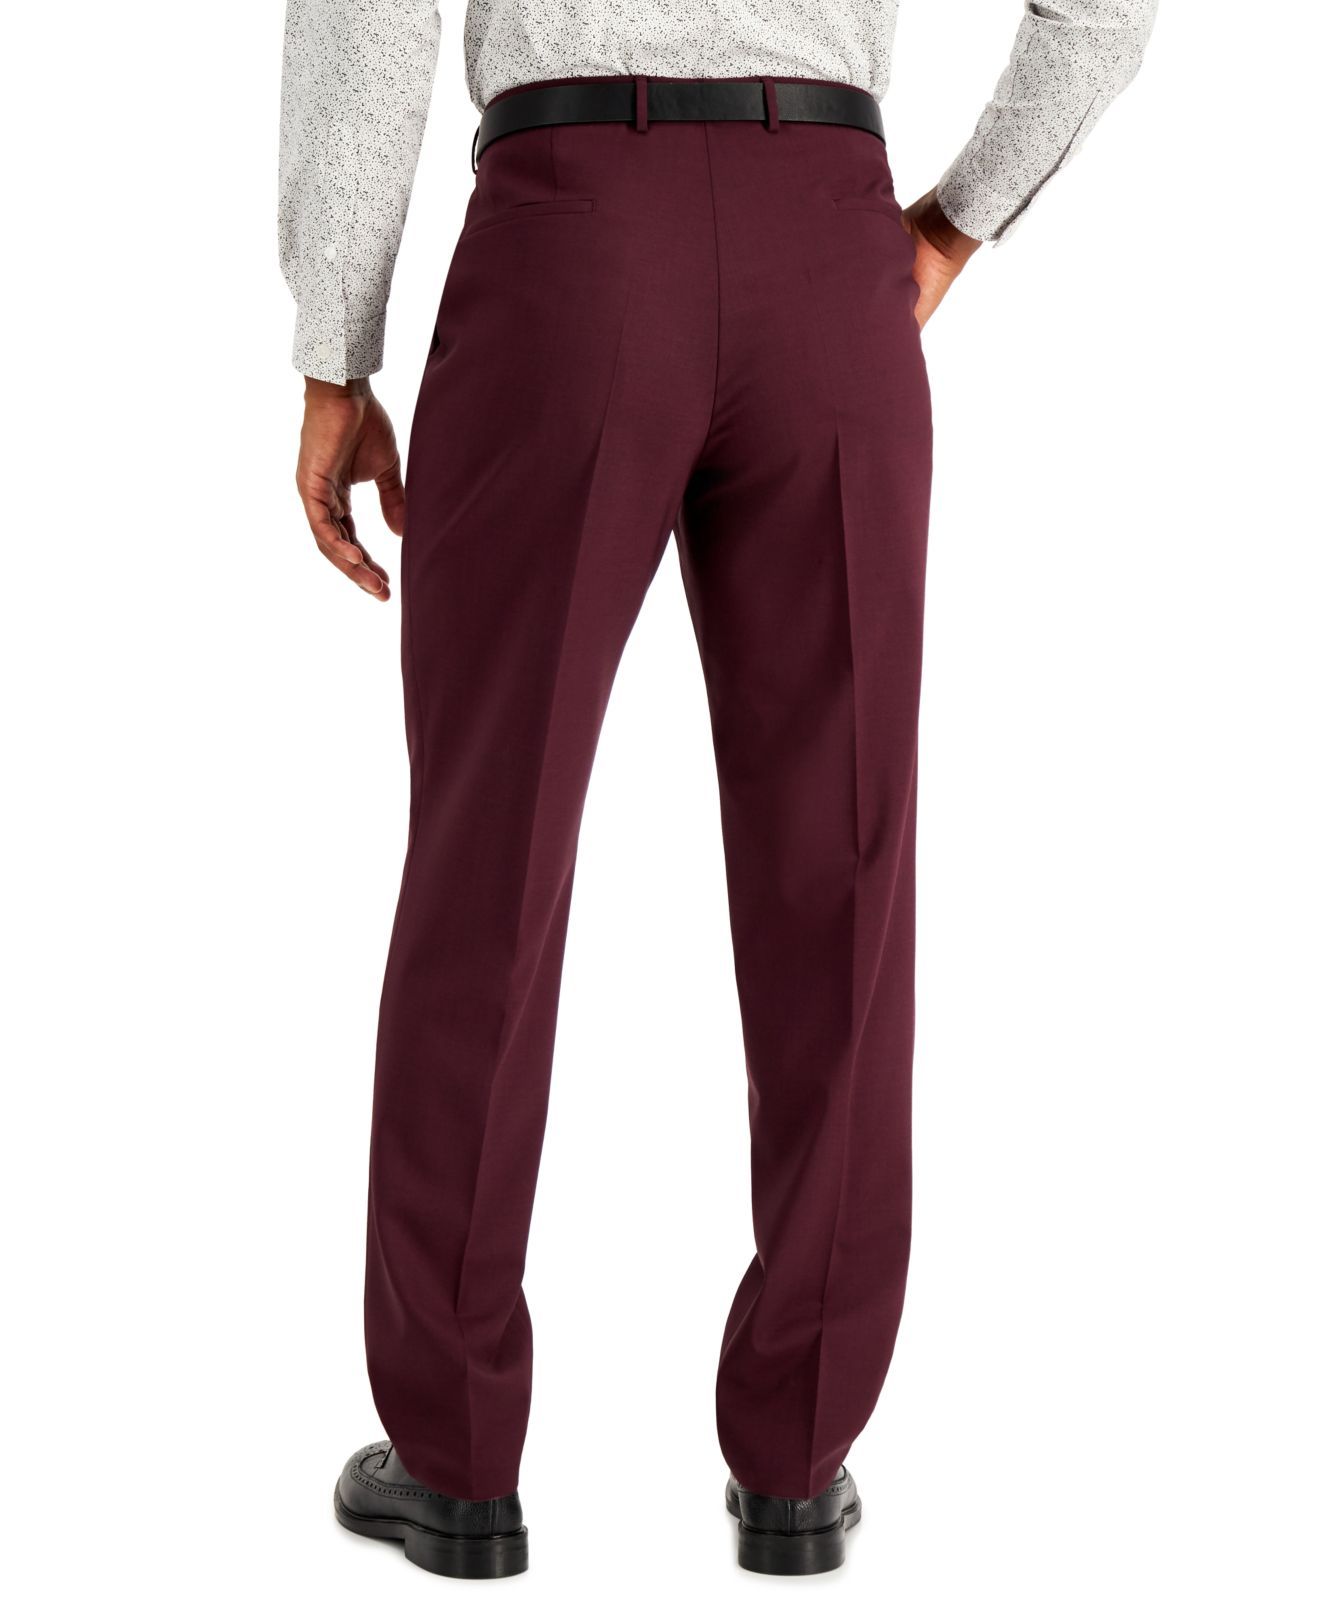 Color: Reds Size Type: Regular Bottoms Size (Men's): 34 Inseam: 33 Type: Pants Style: Dress Pants Occasion: Formal Material: Wool Blends Stretch: YES